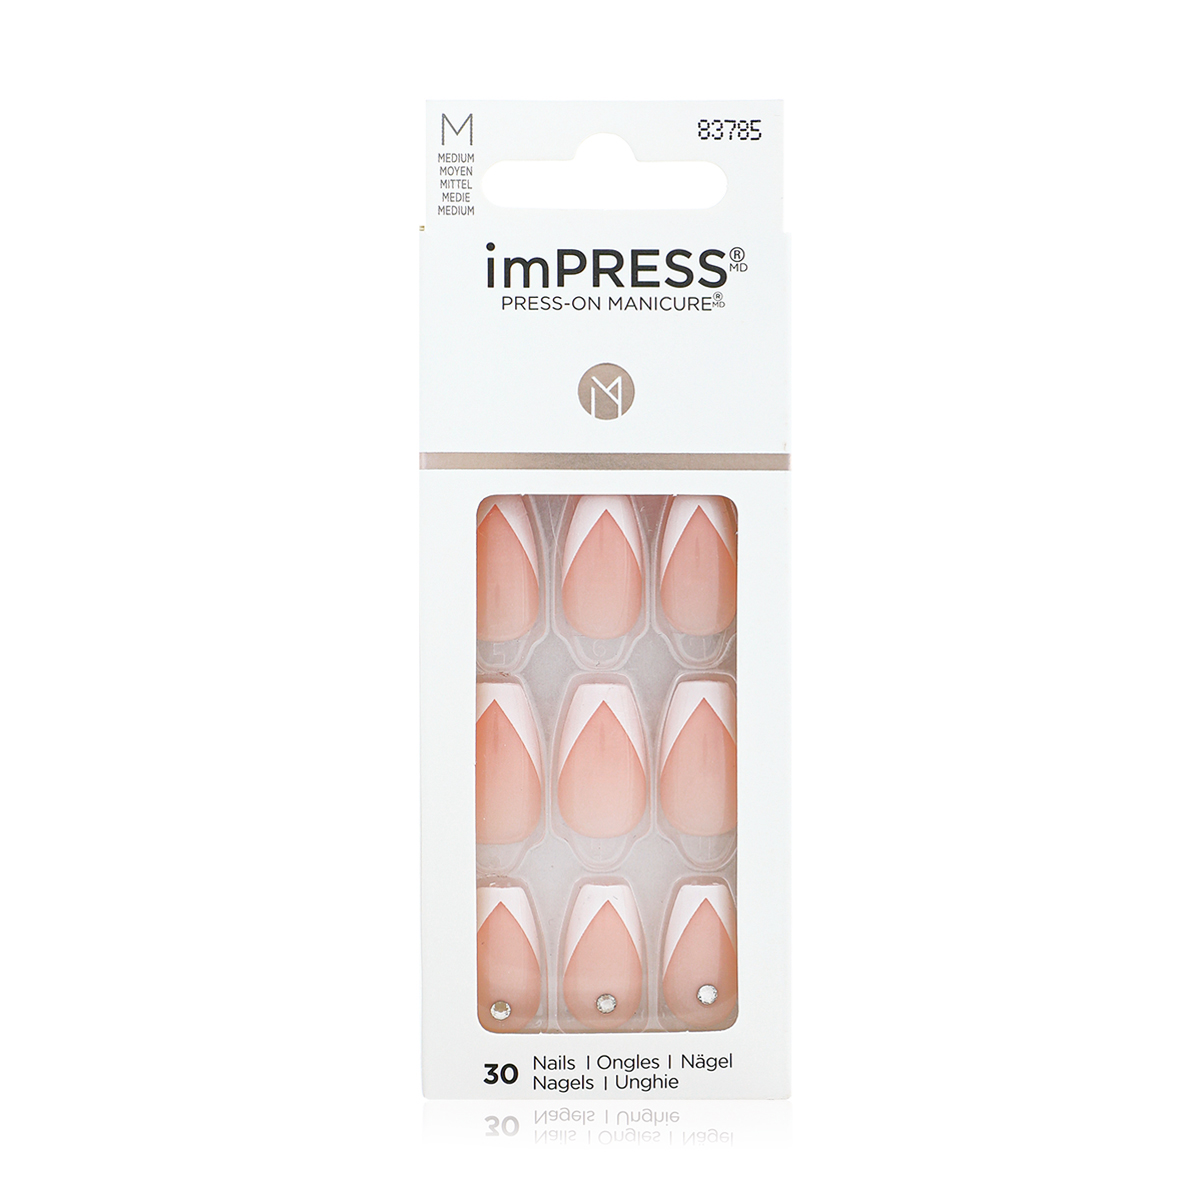 Buy imPRESS Press-on Manicure - So French Online in Bahrain | Boutiqaat